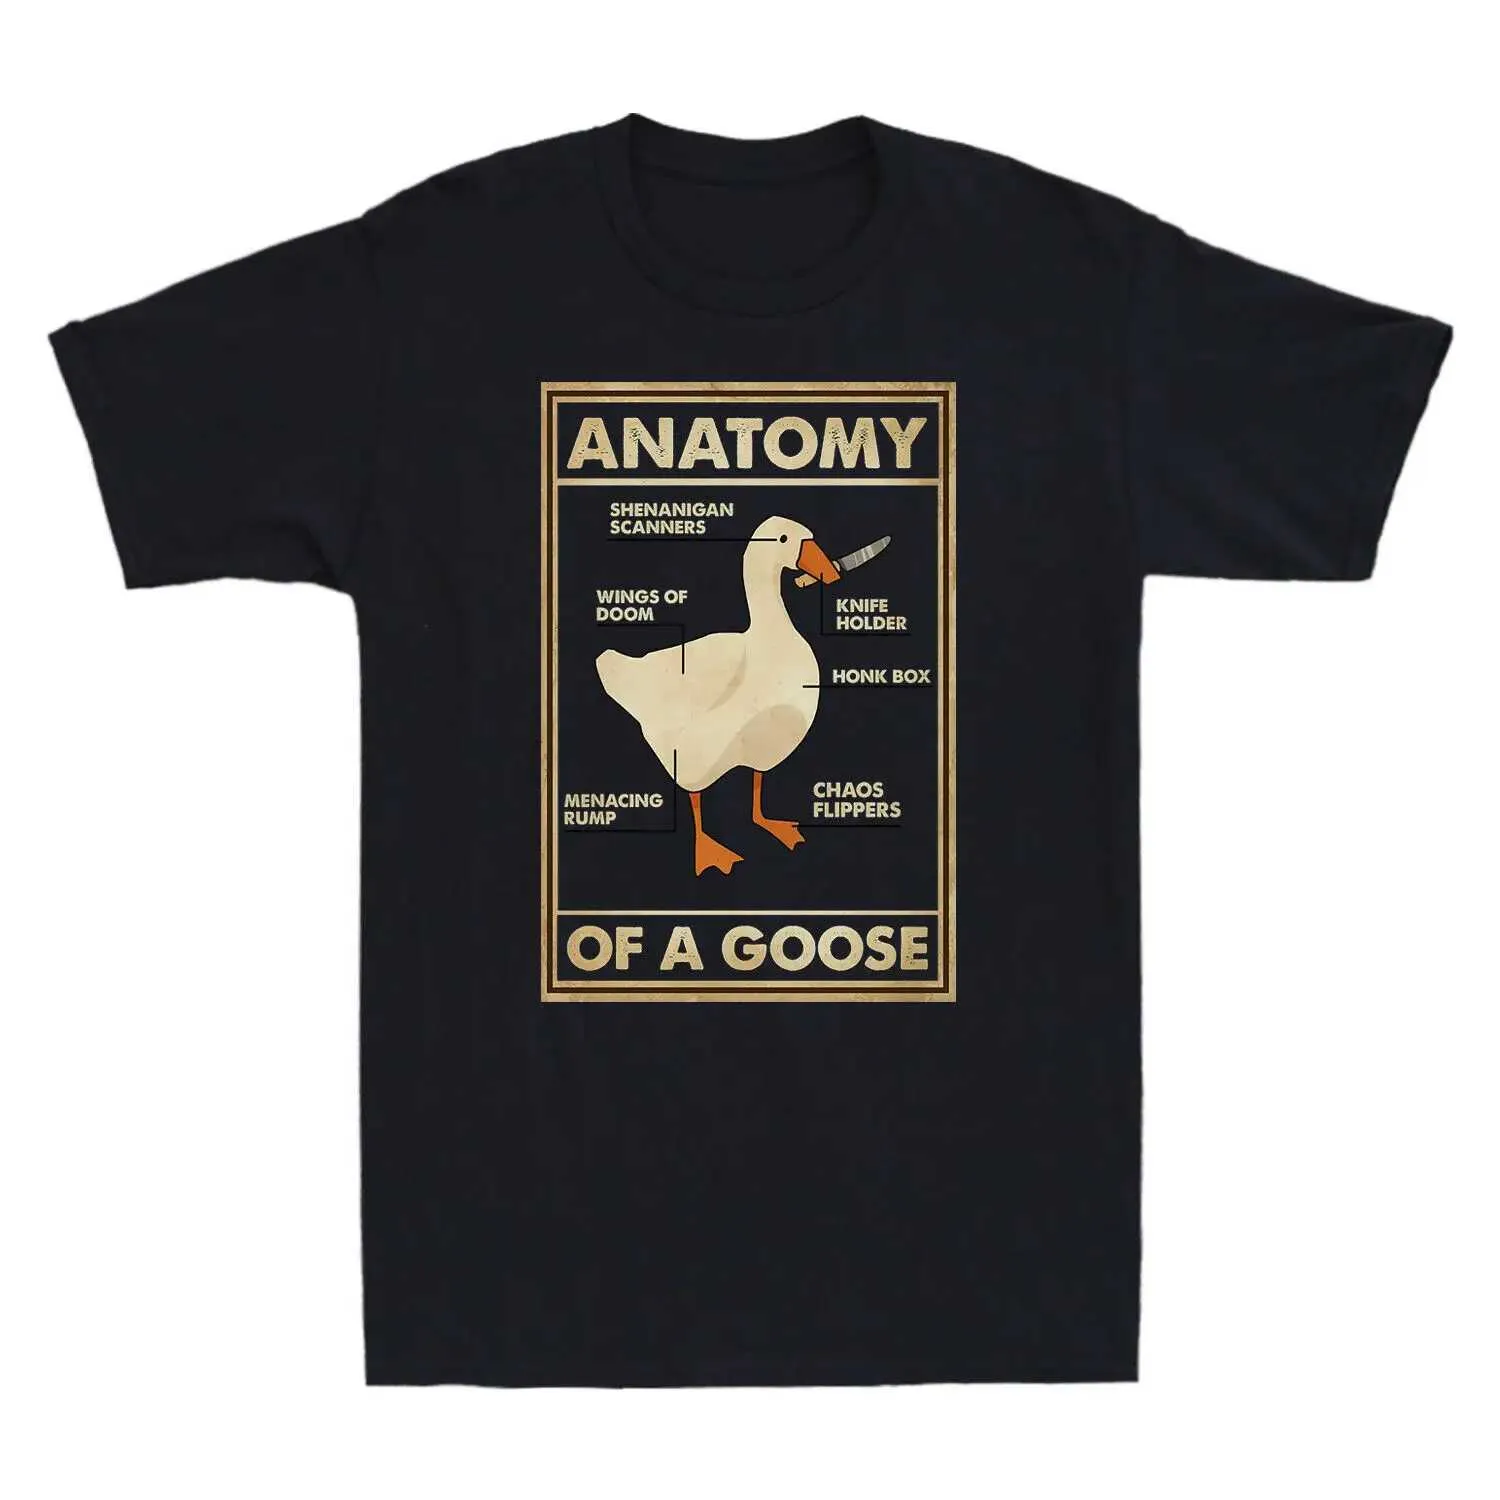 Men's T-Shirts Kawaii Anatomy of A Goose Graphic T Shirt Funny Duck Gaming Gamer Retro Men Women Tops Creative Gothic Male Ts Ropa Hombre T240510